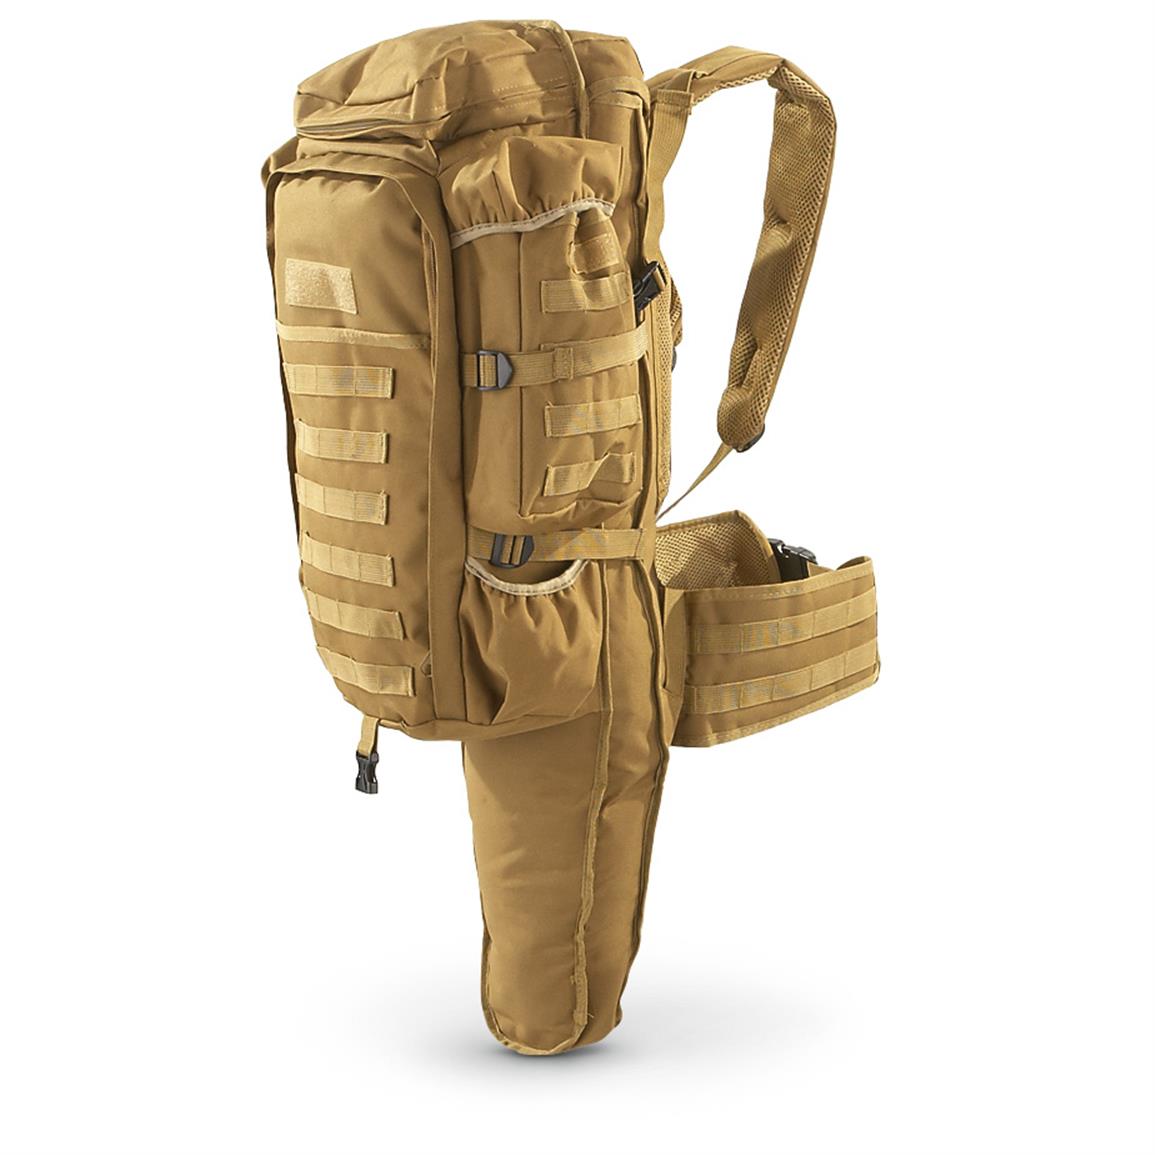 Cactus Jack Tactical Assault Coyote Tan Backpack w/ padded rifle compartment,new 